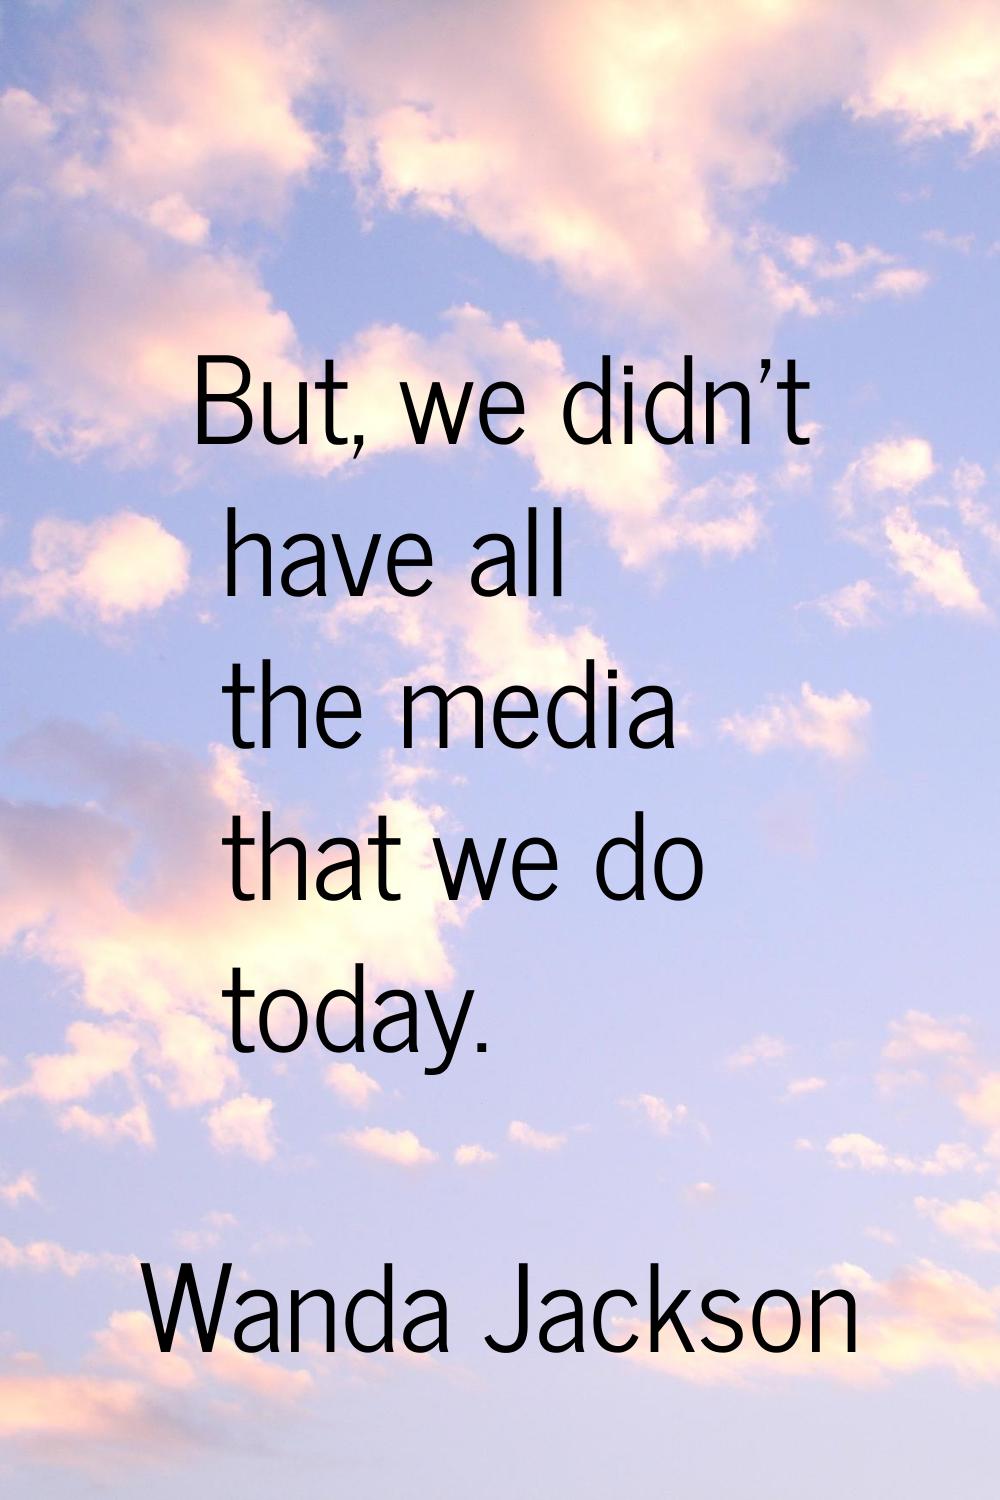 But, we didn't have all the media that we do today.